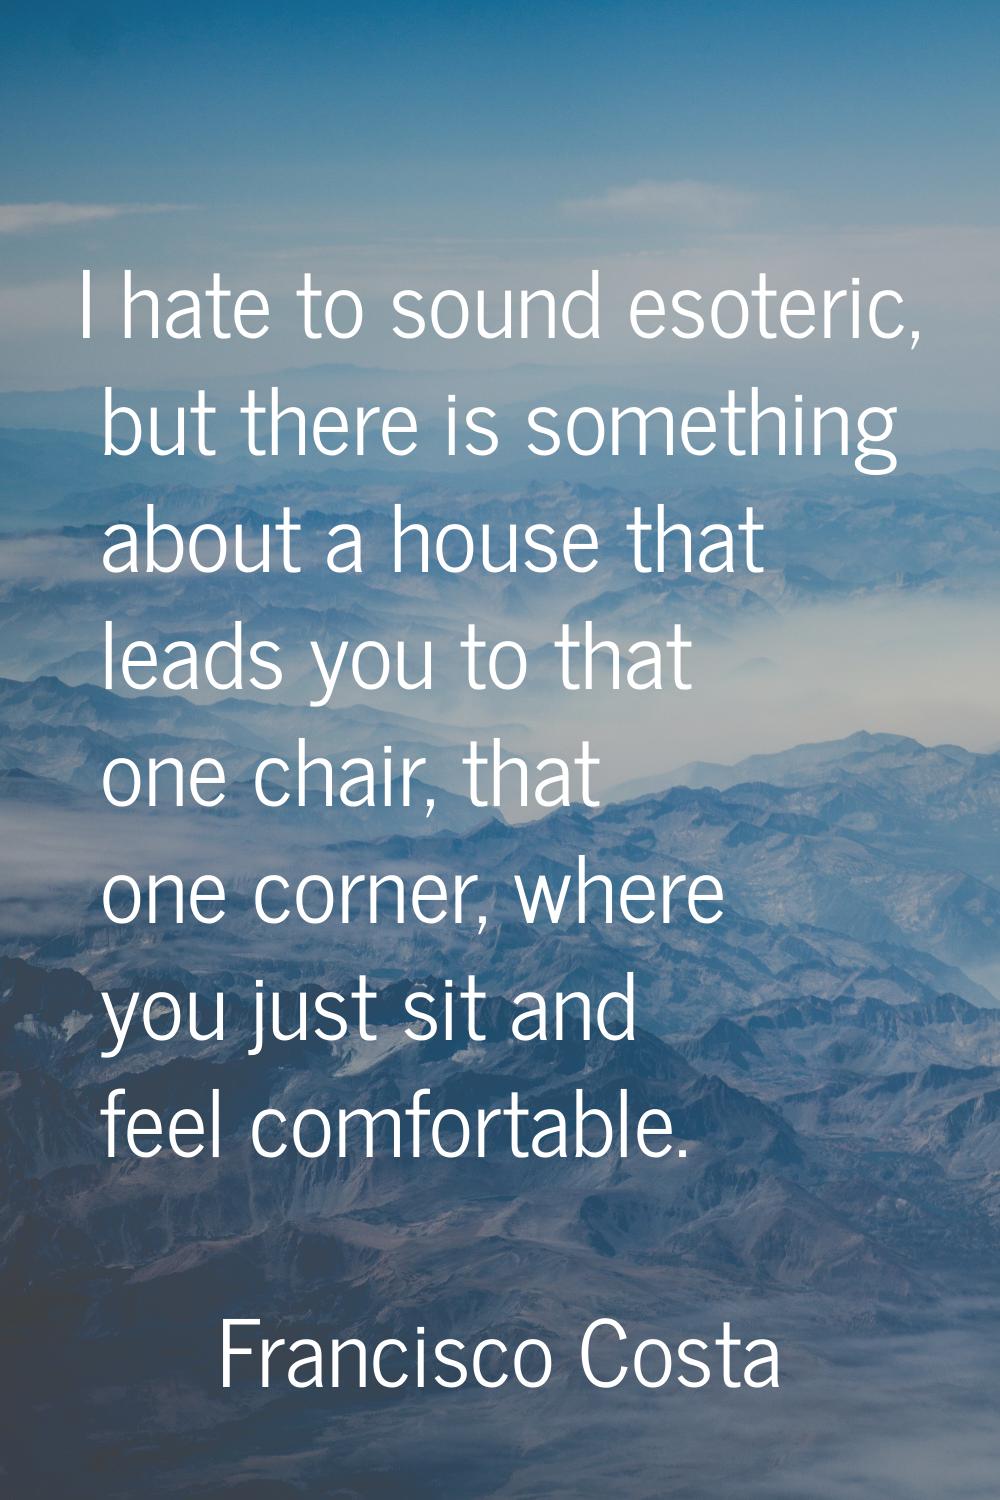 I hate to sound esoteric, but there is something about a house that leads you to that one chair, th